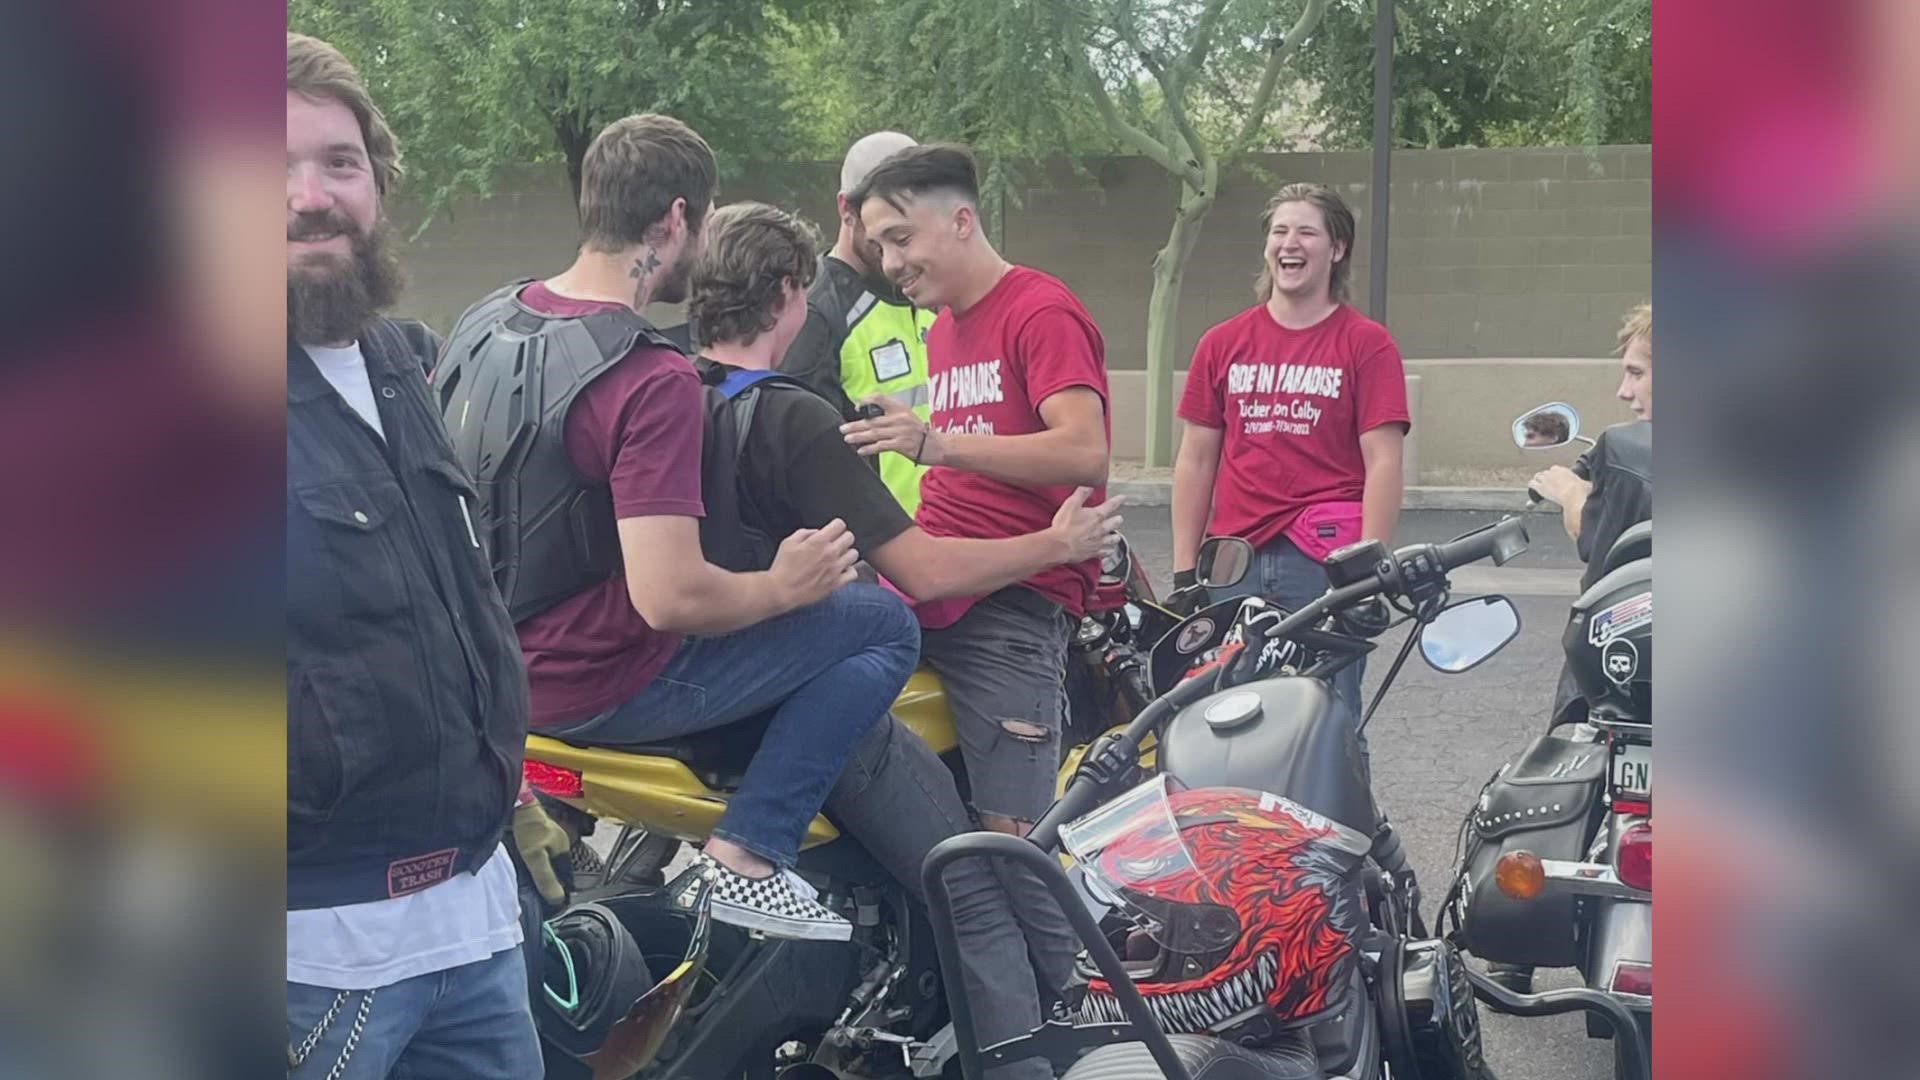 The friends of Bryce Burgess, who died last week in Surprise after he was hit on his motorcycle, are urging others to protect themselves on the road.